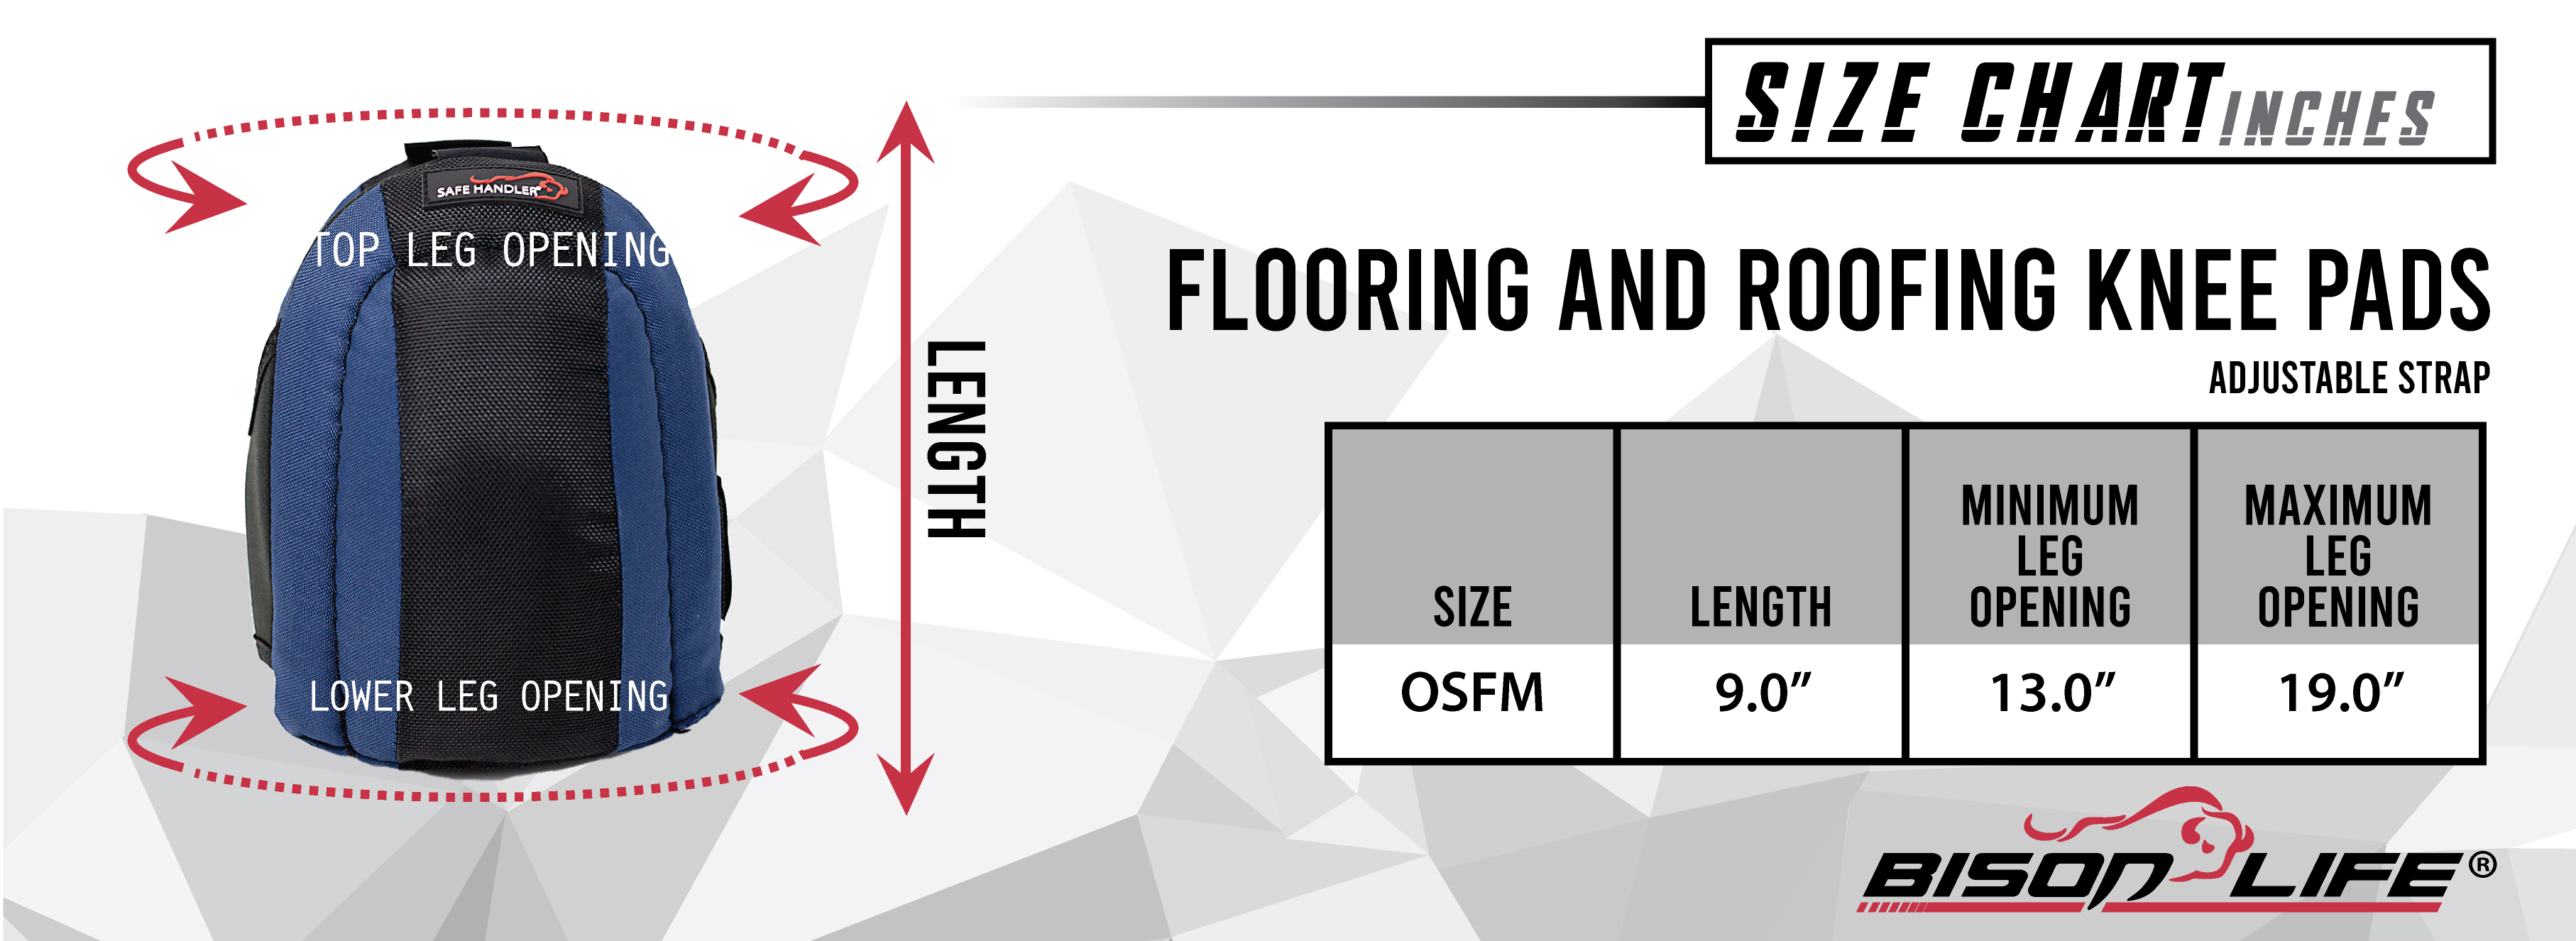 Florring and Roofing Knee Pads Chart